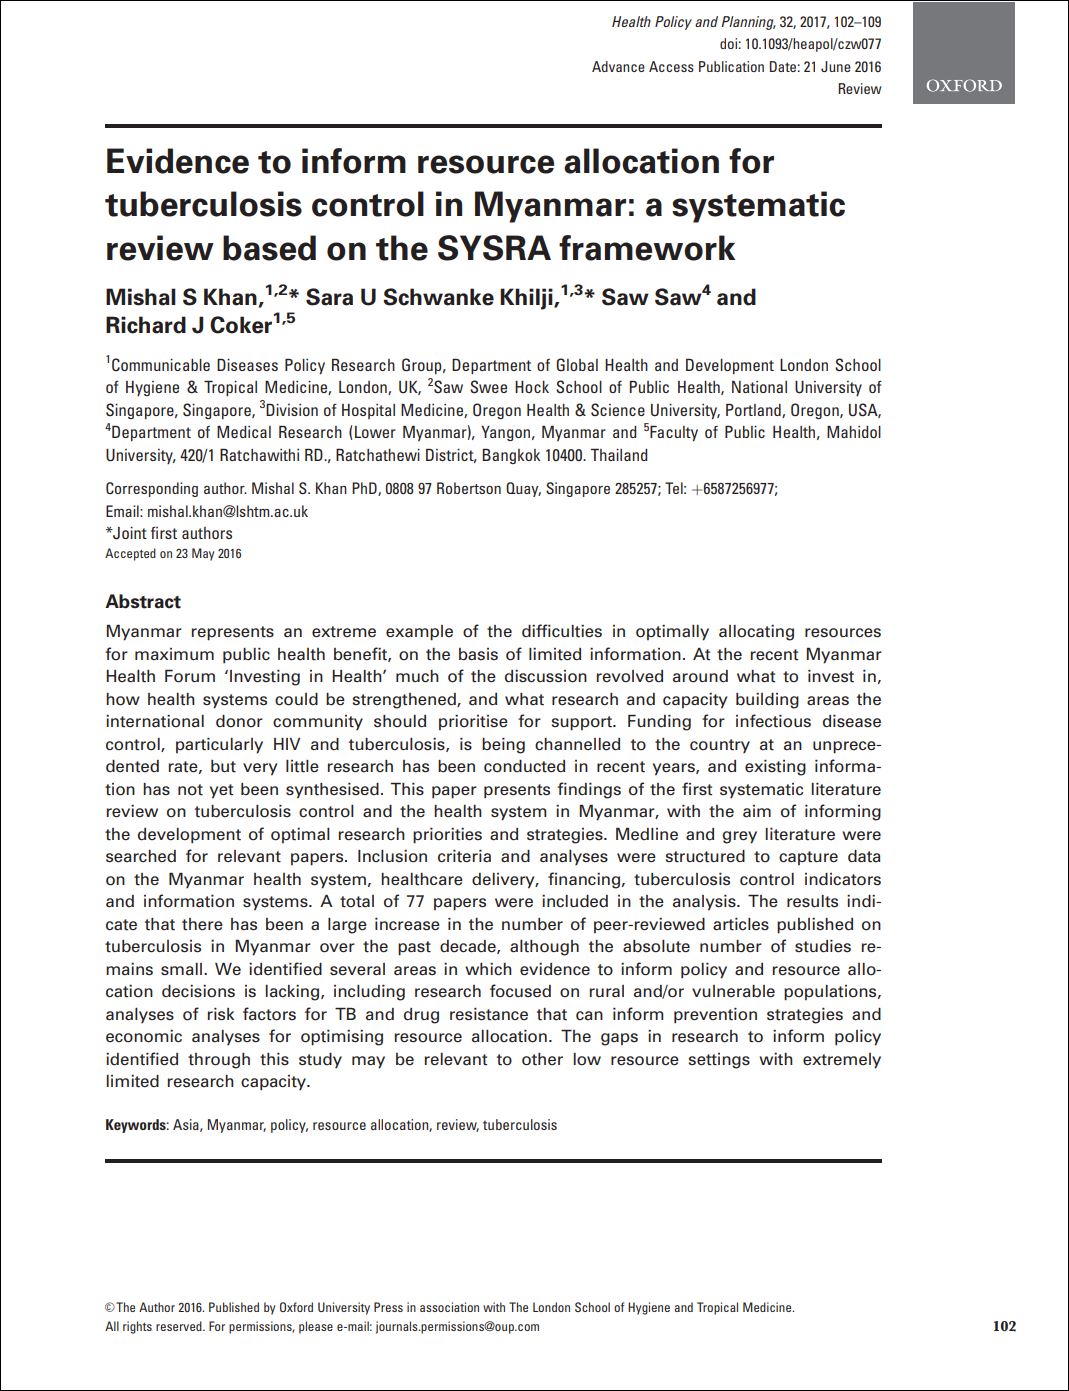 Evidence to inform resource allocation for tuberculosis control in Myanmar: a systematic review based on the SYSRA framework